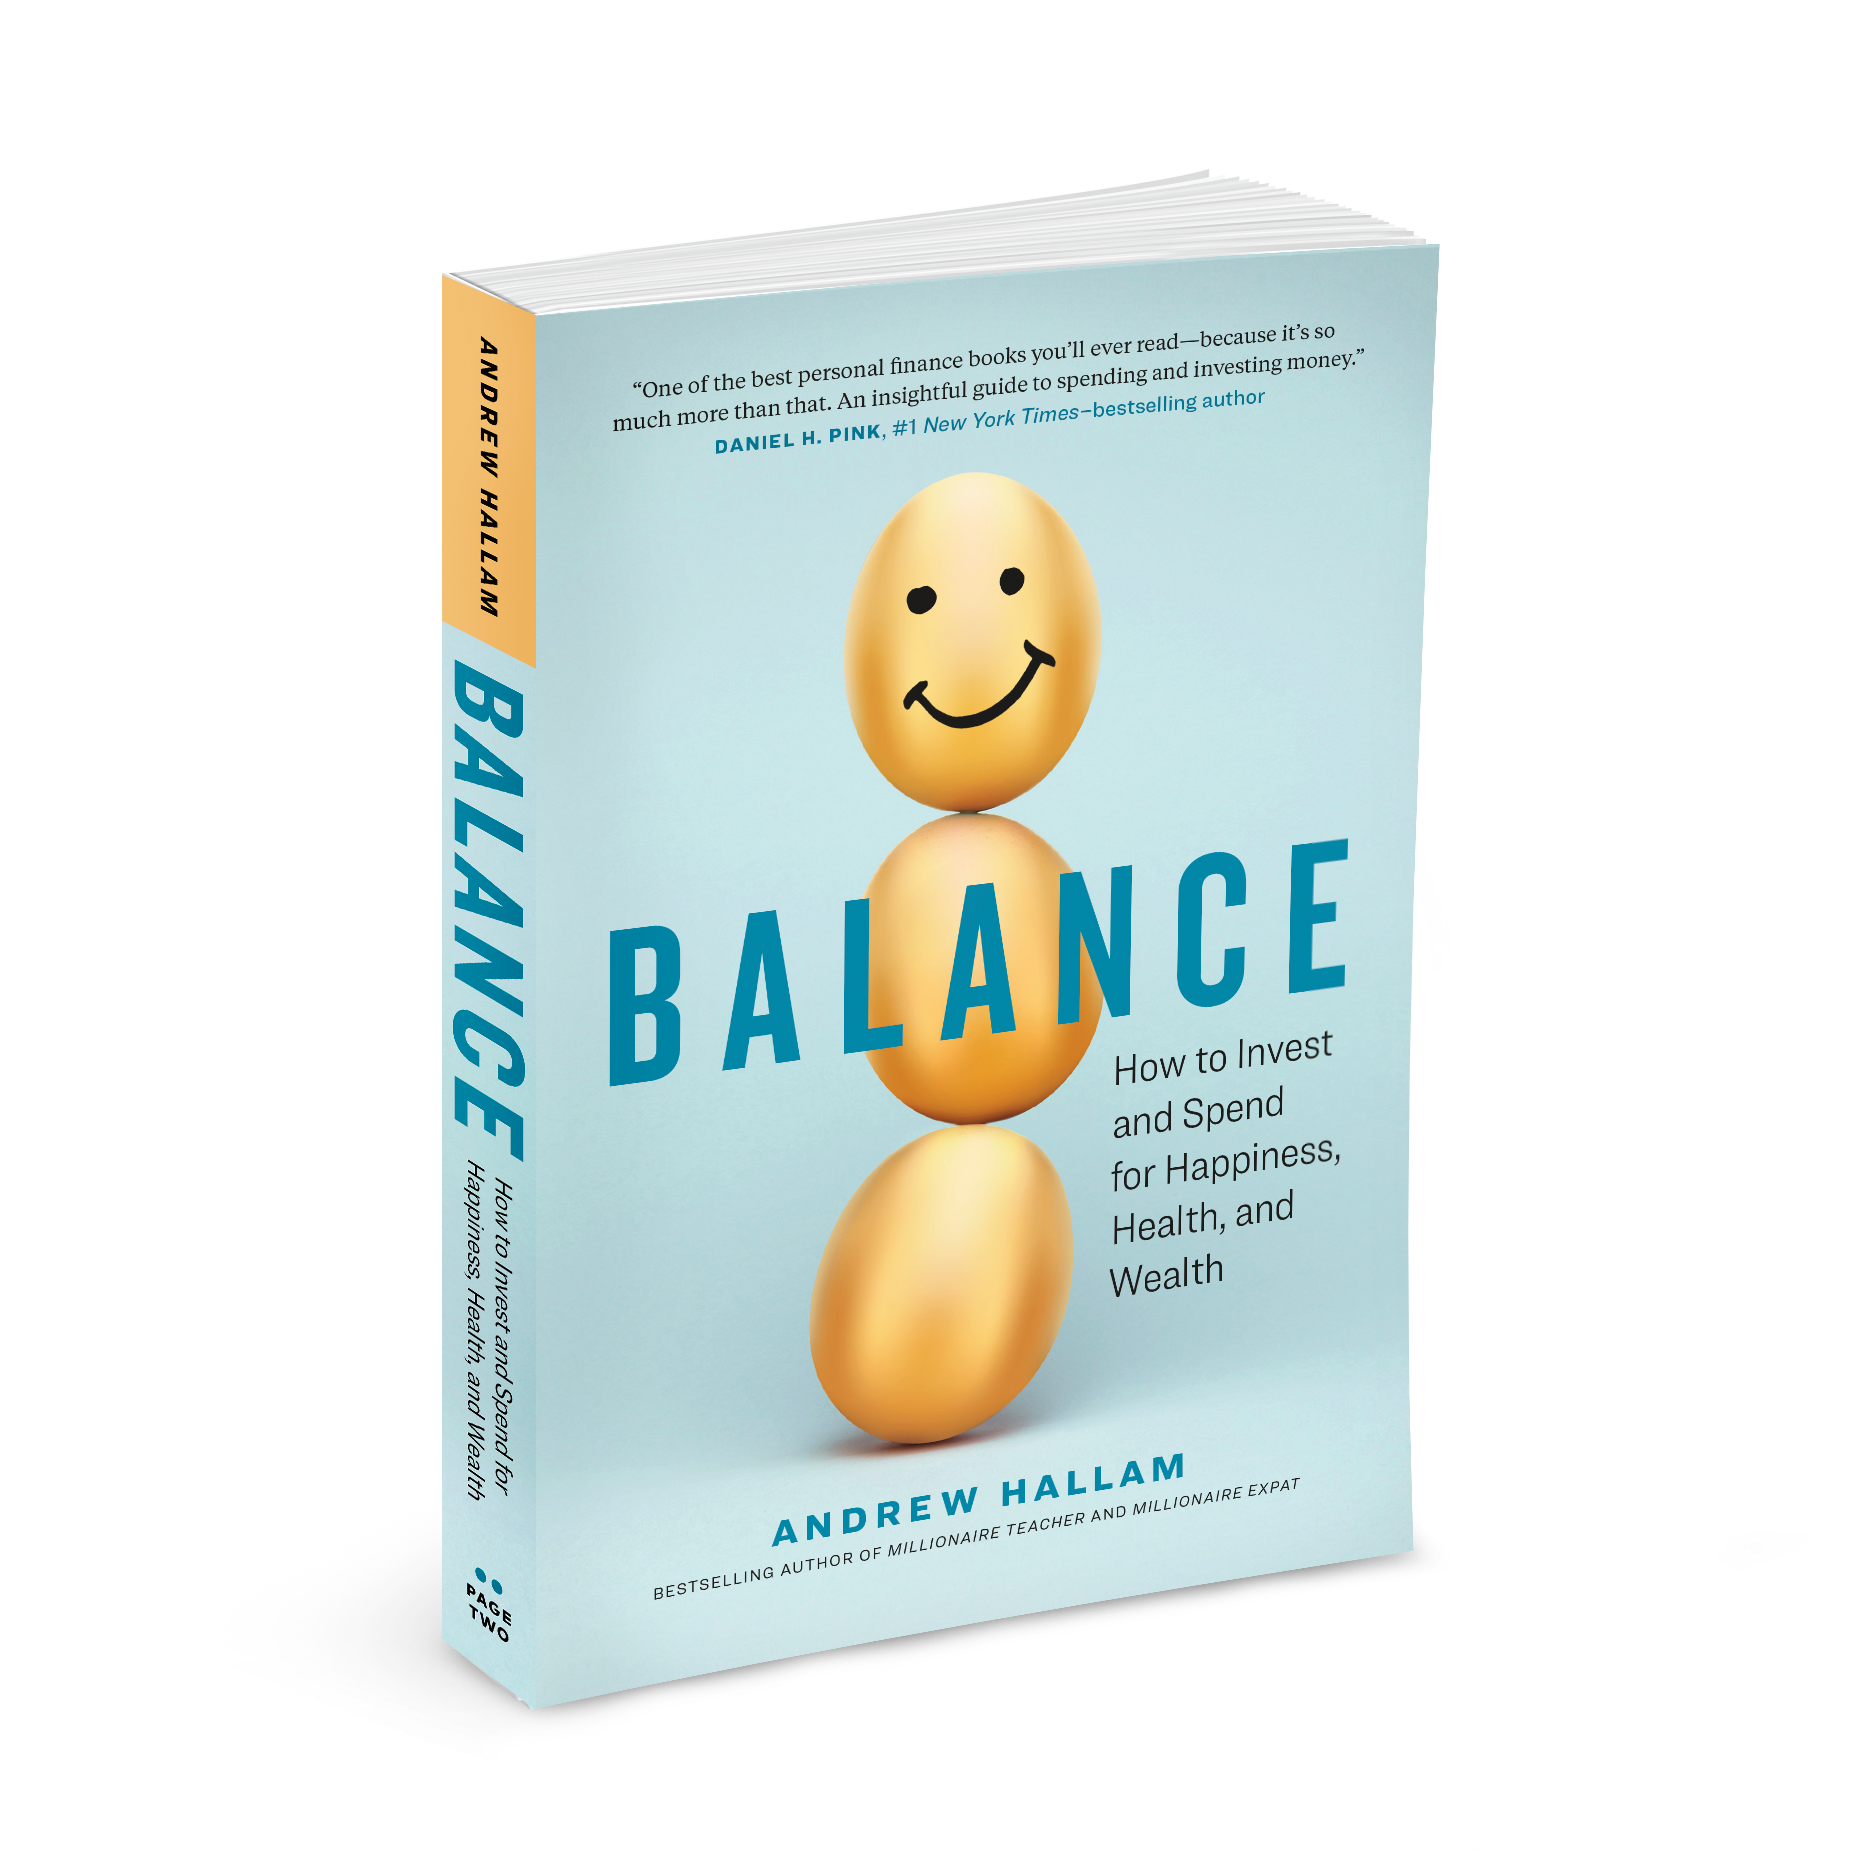 Coming Soon -- Balance by Andrew Hallam